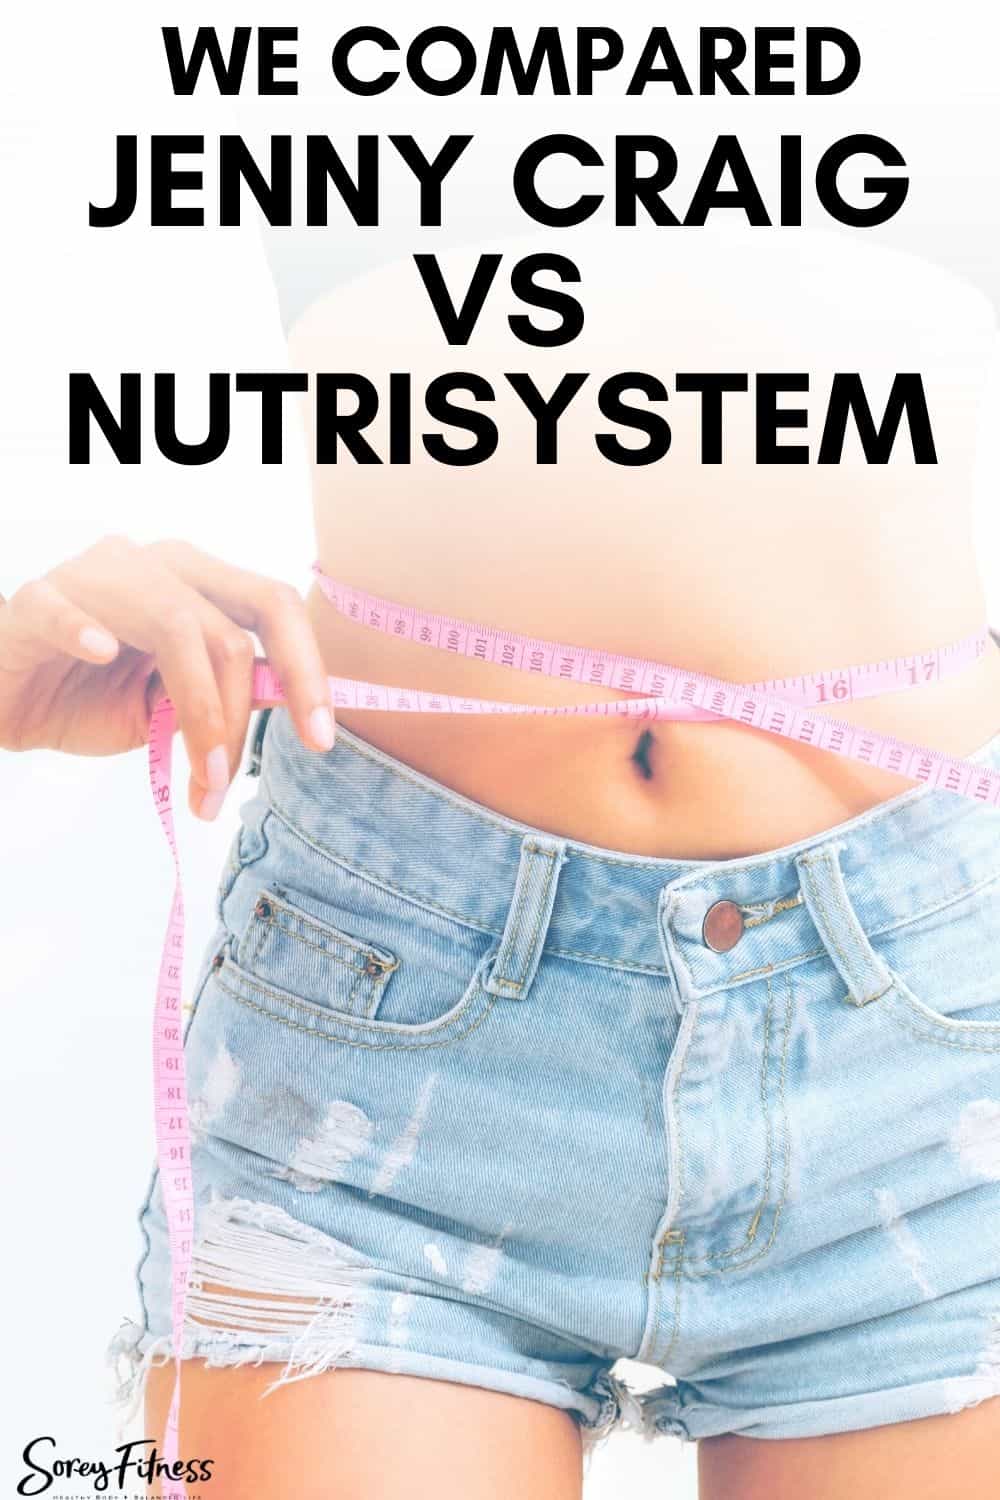 womans stomach with the text overlay "we compared jenny craig vs nutrisystem"